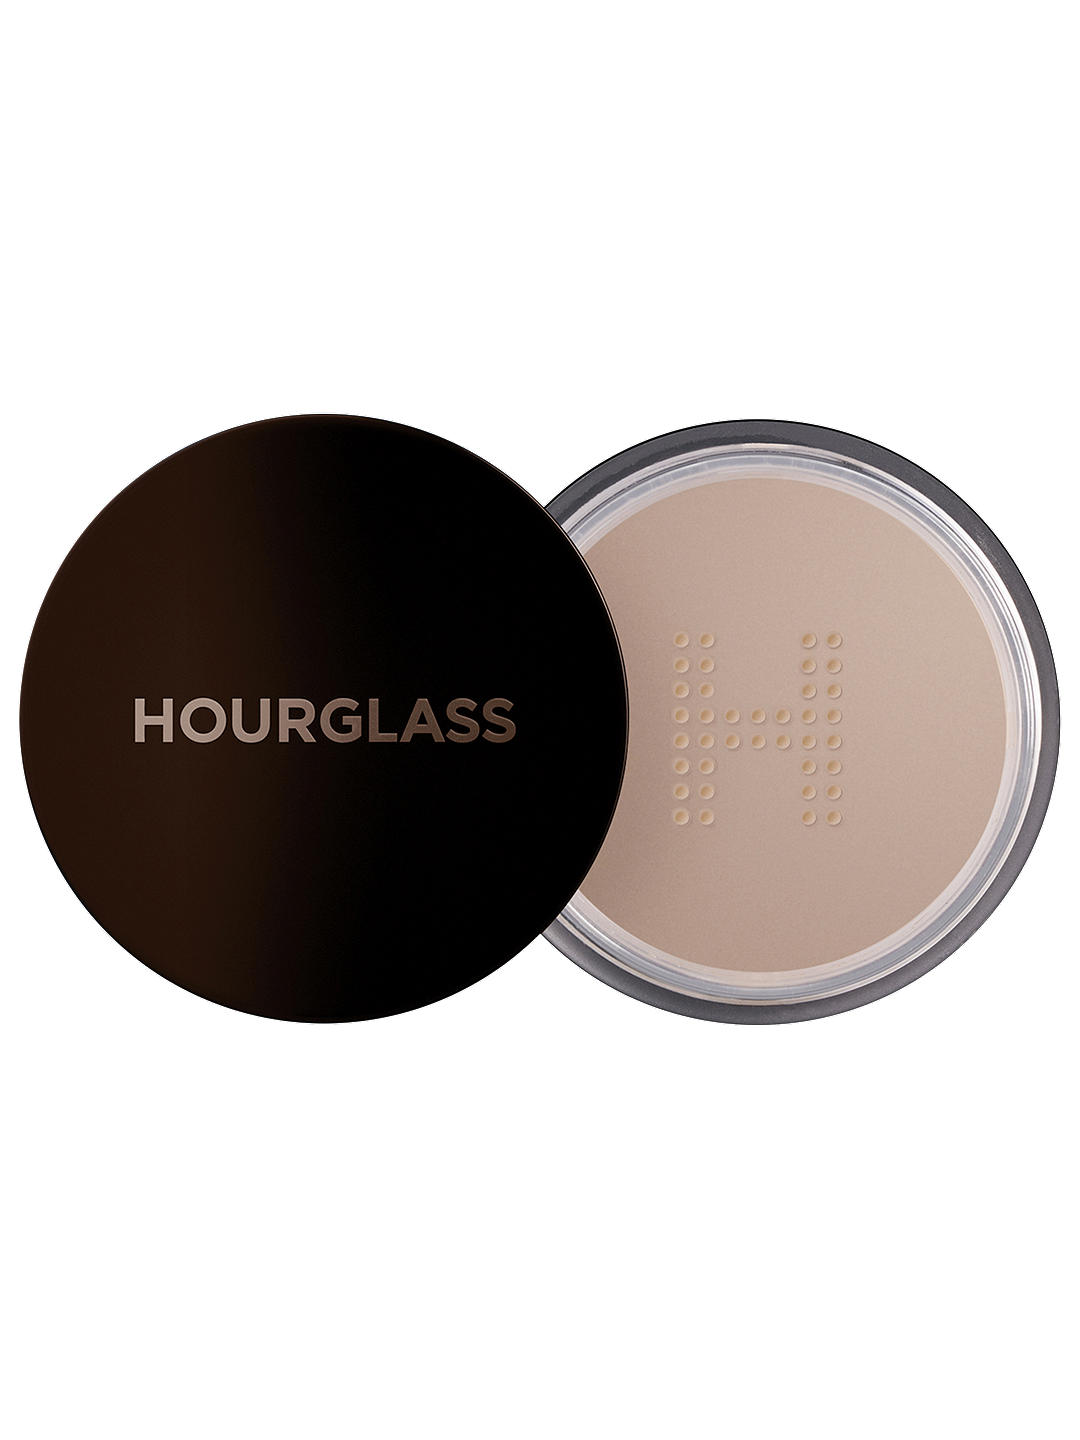 Hourglass Veil Translucent Setting Powder, Travel Size, Clear 1